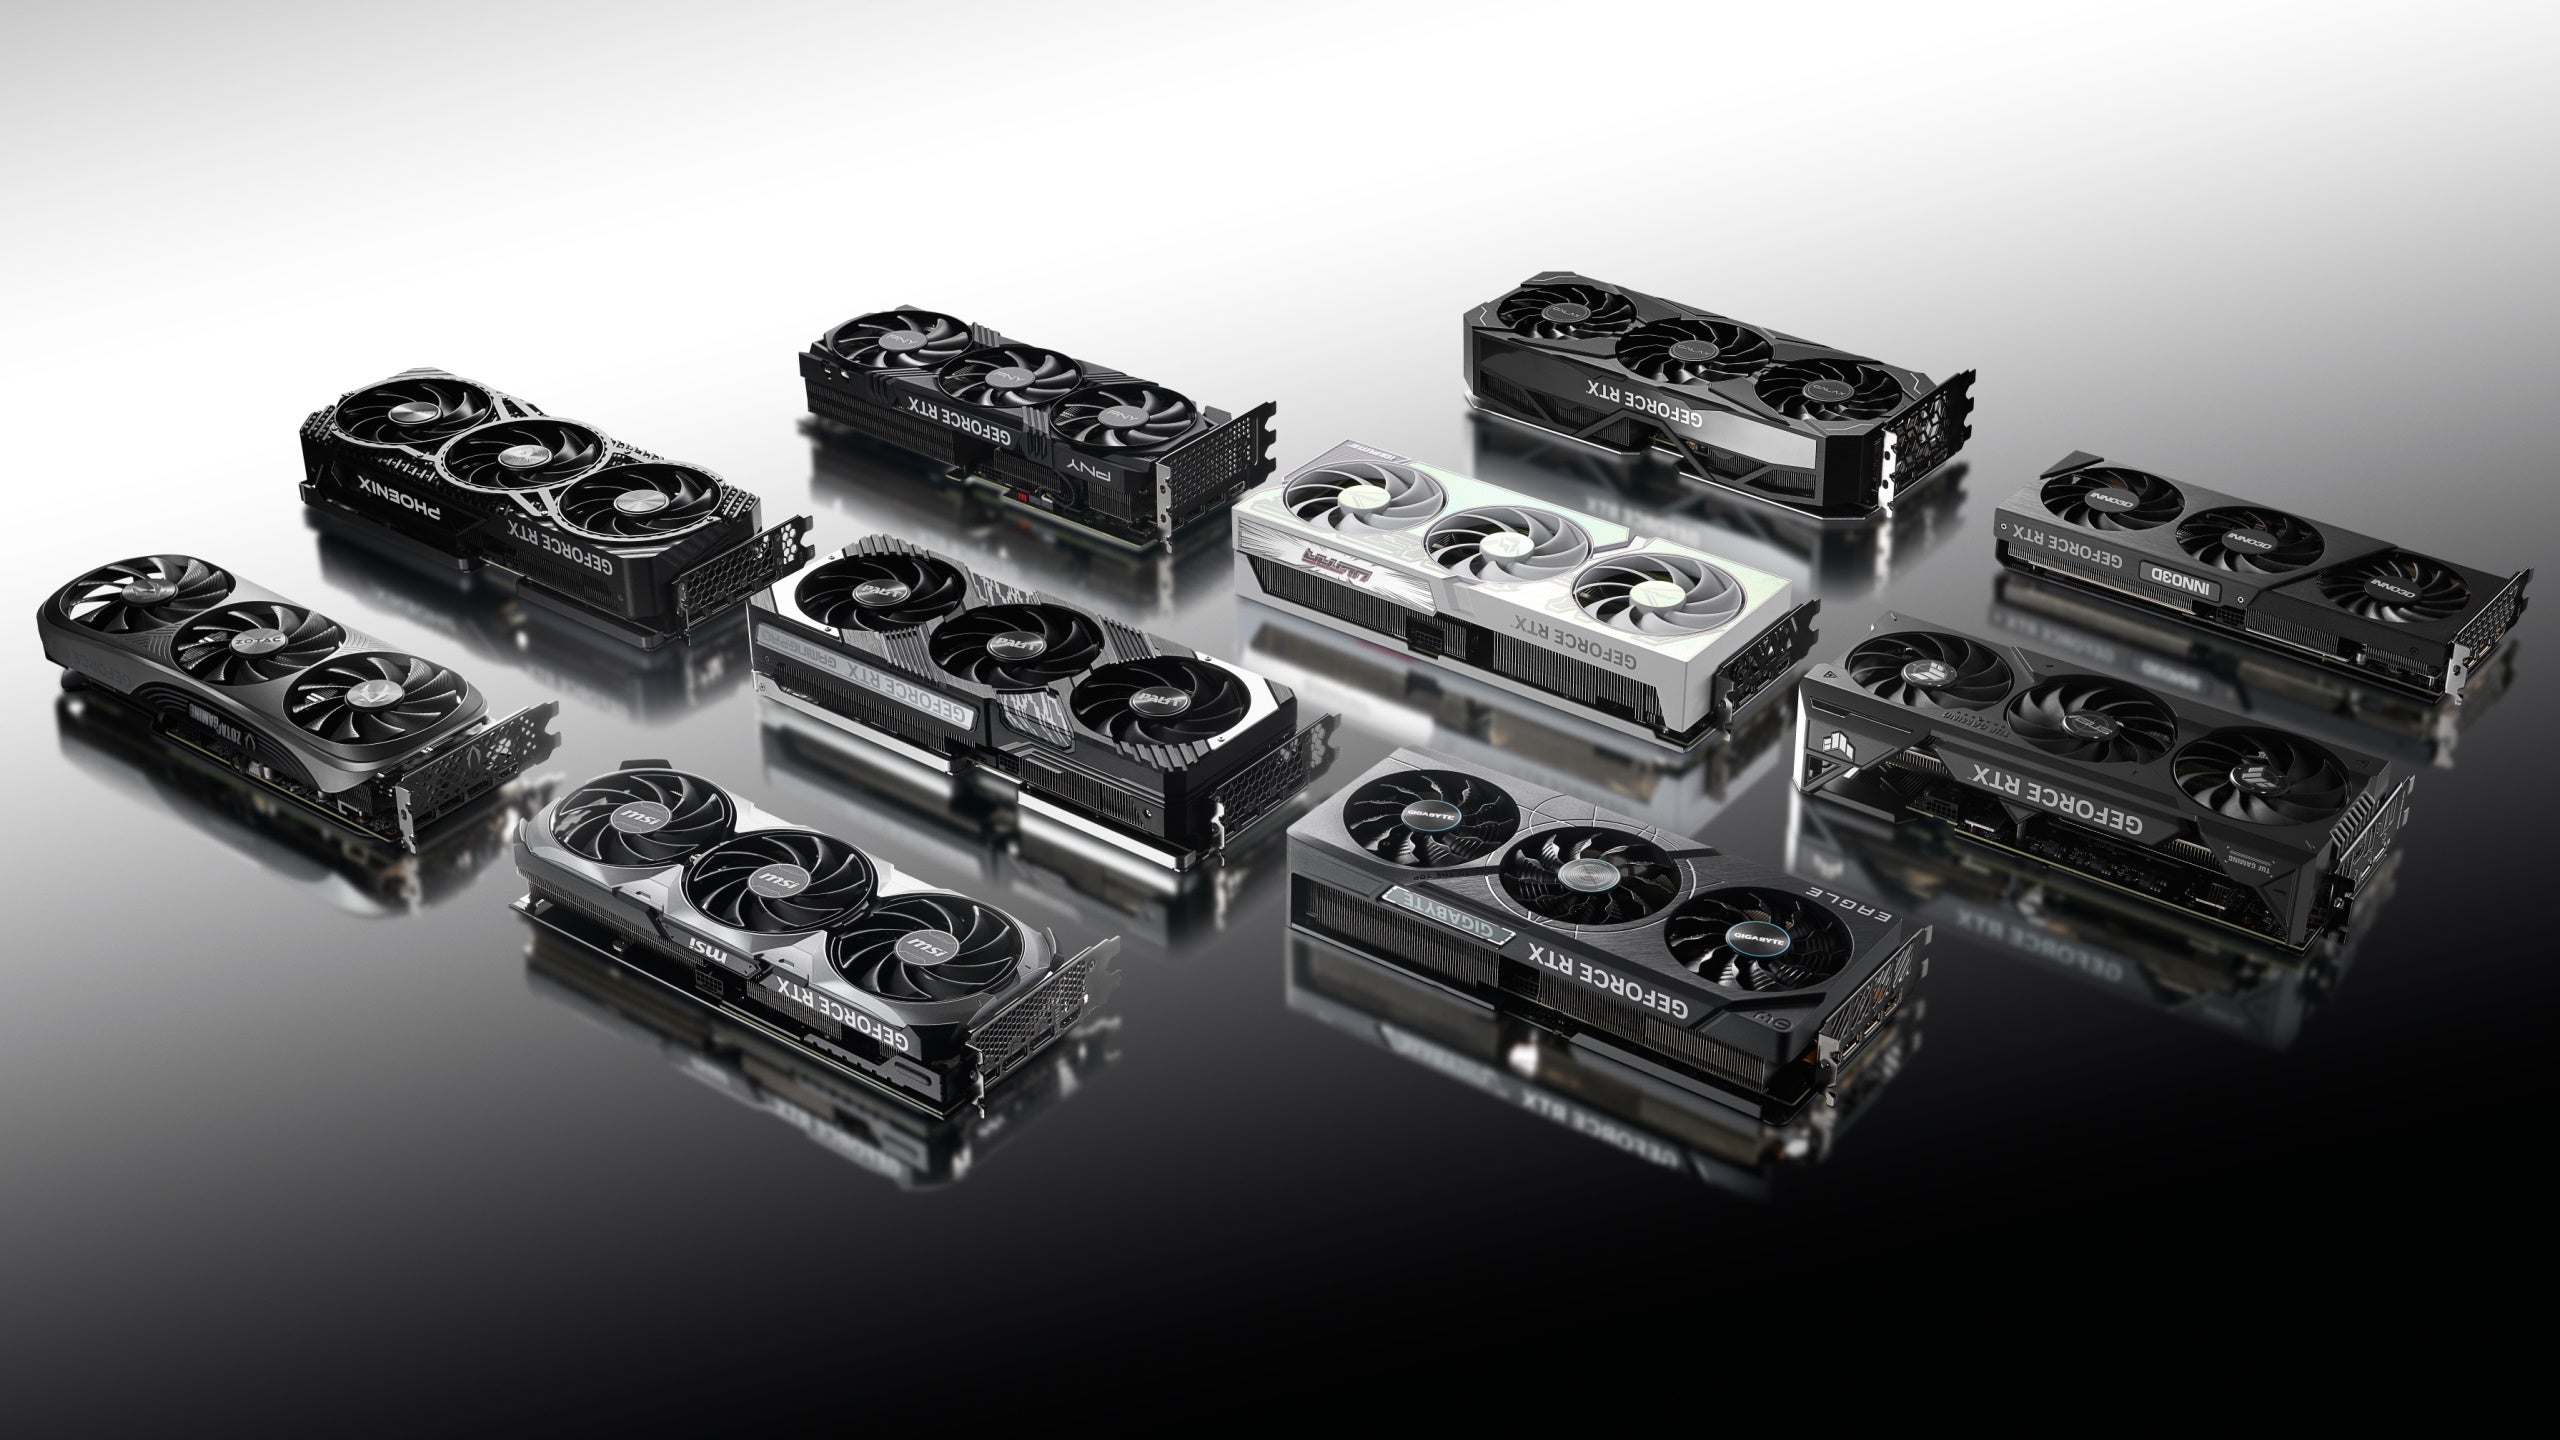 Many graphics cards laid out in black and white, showing off several Nvidia RTX 4070 Ti GPUs